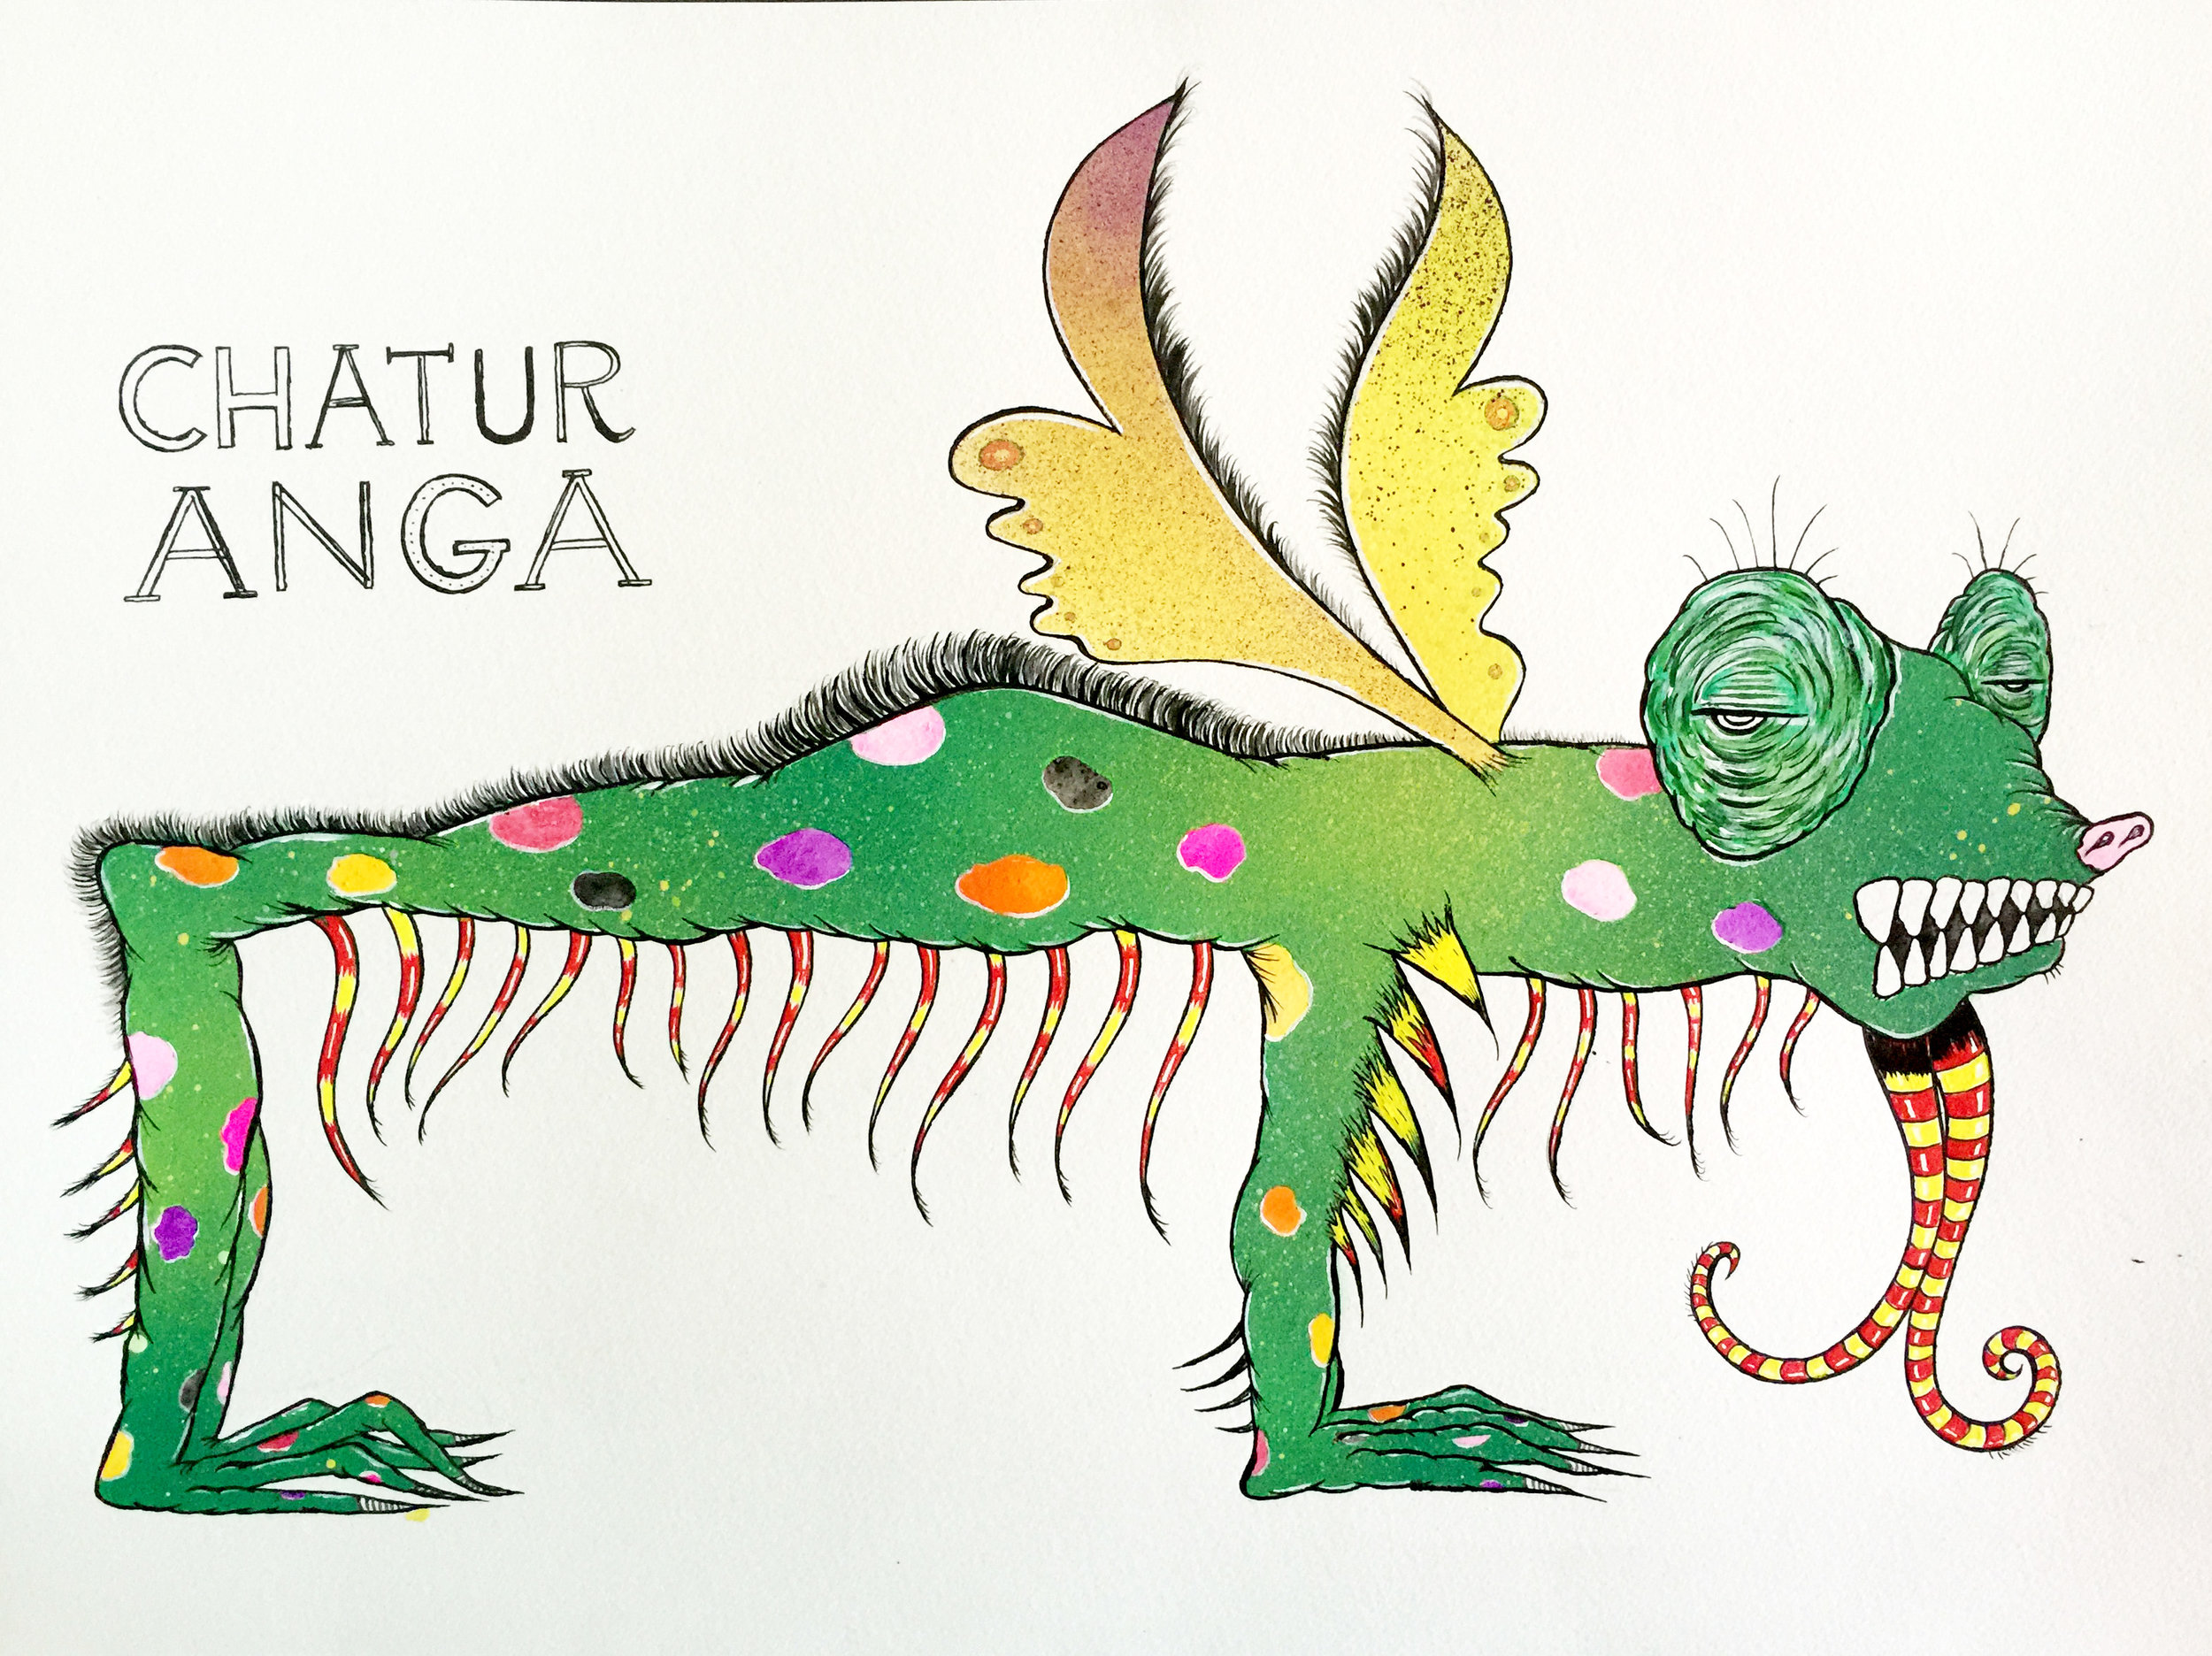 CHATURANGA (ONE IN A SERIES: YOGA POSES AS MYTHICAL CREATURES)